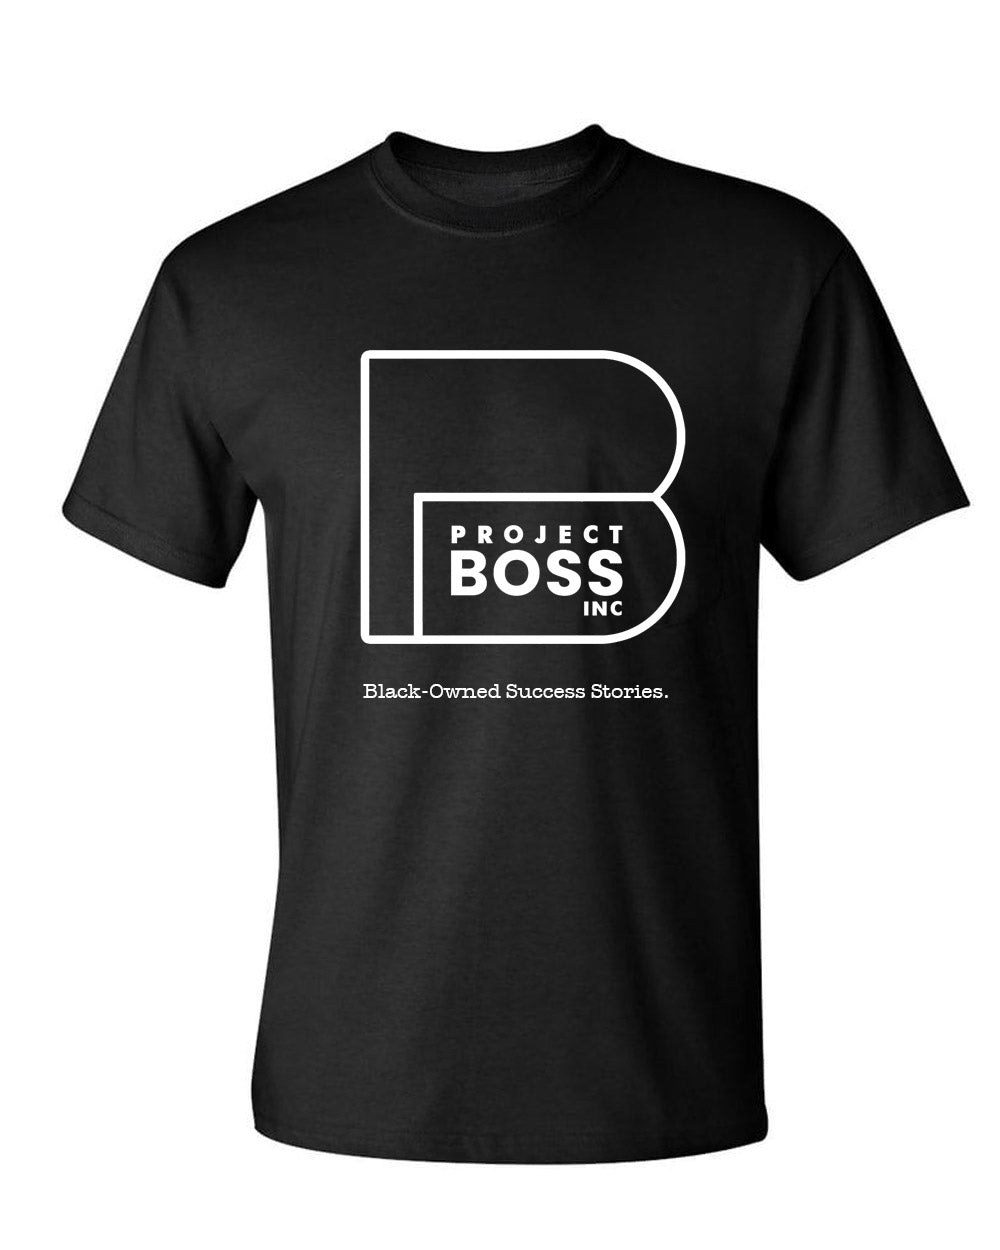 Project BOSS' "Black Owned Success Stories" Tee